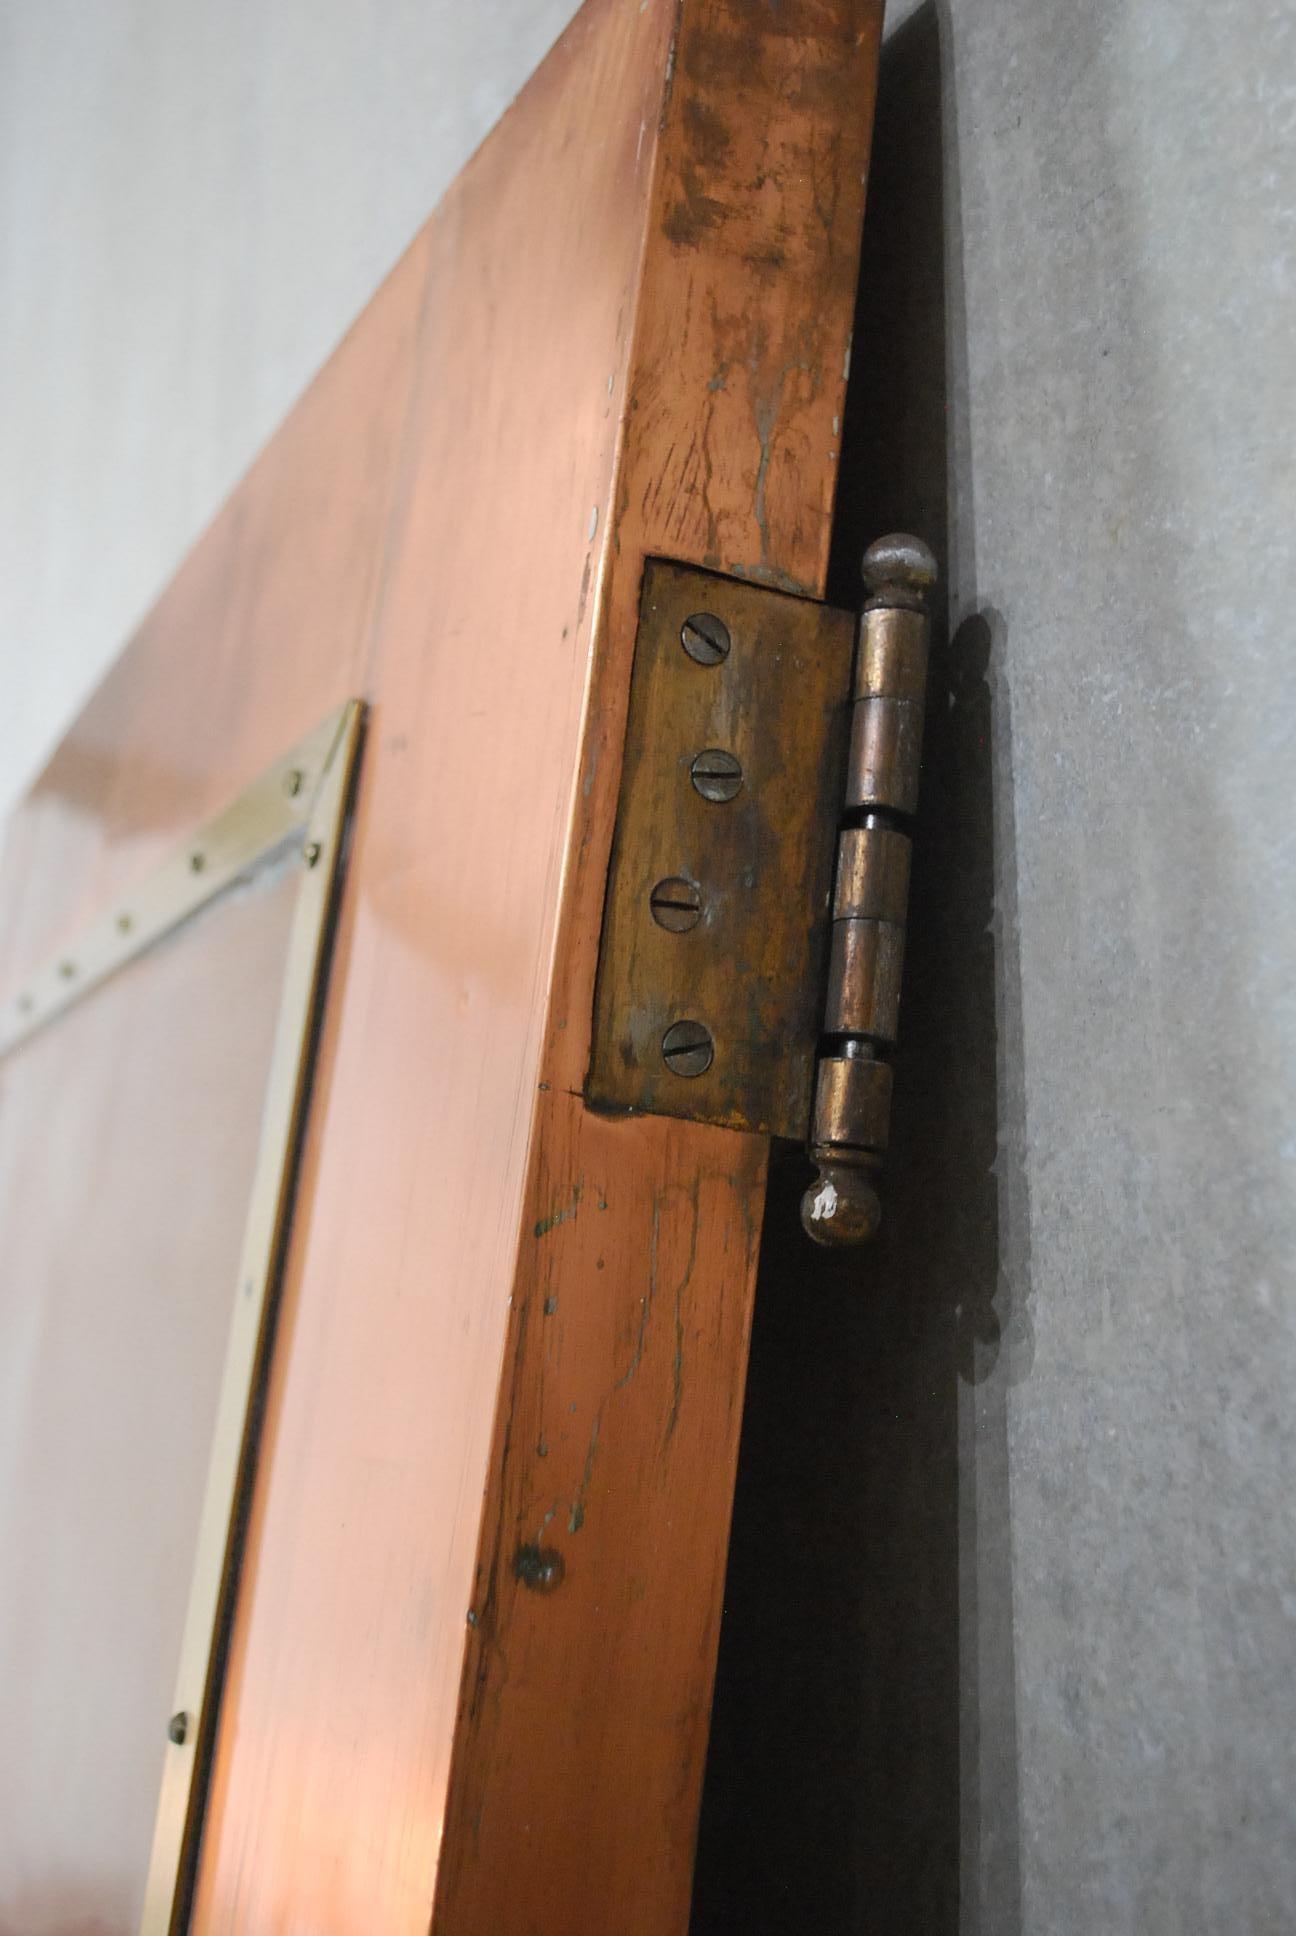 Beautiful copper cladded two-sided door with brass hi light panels.
Salvaged from an industrial building in Montreal. A rare find. hang on tracks or use existing hinges for swing door.